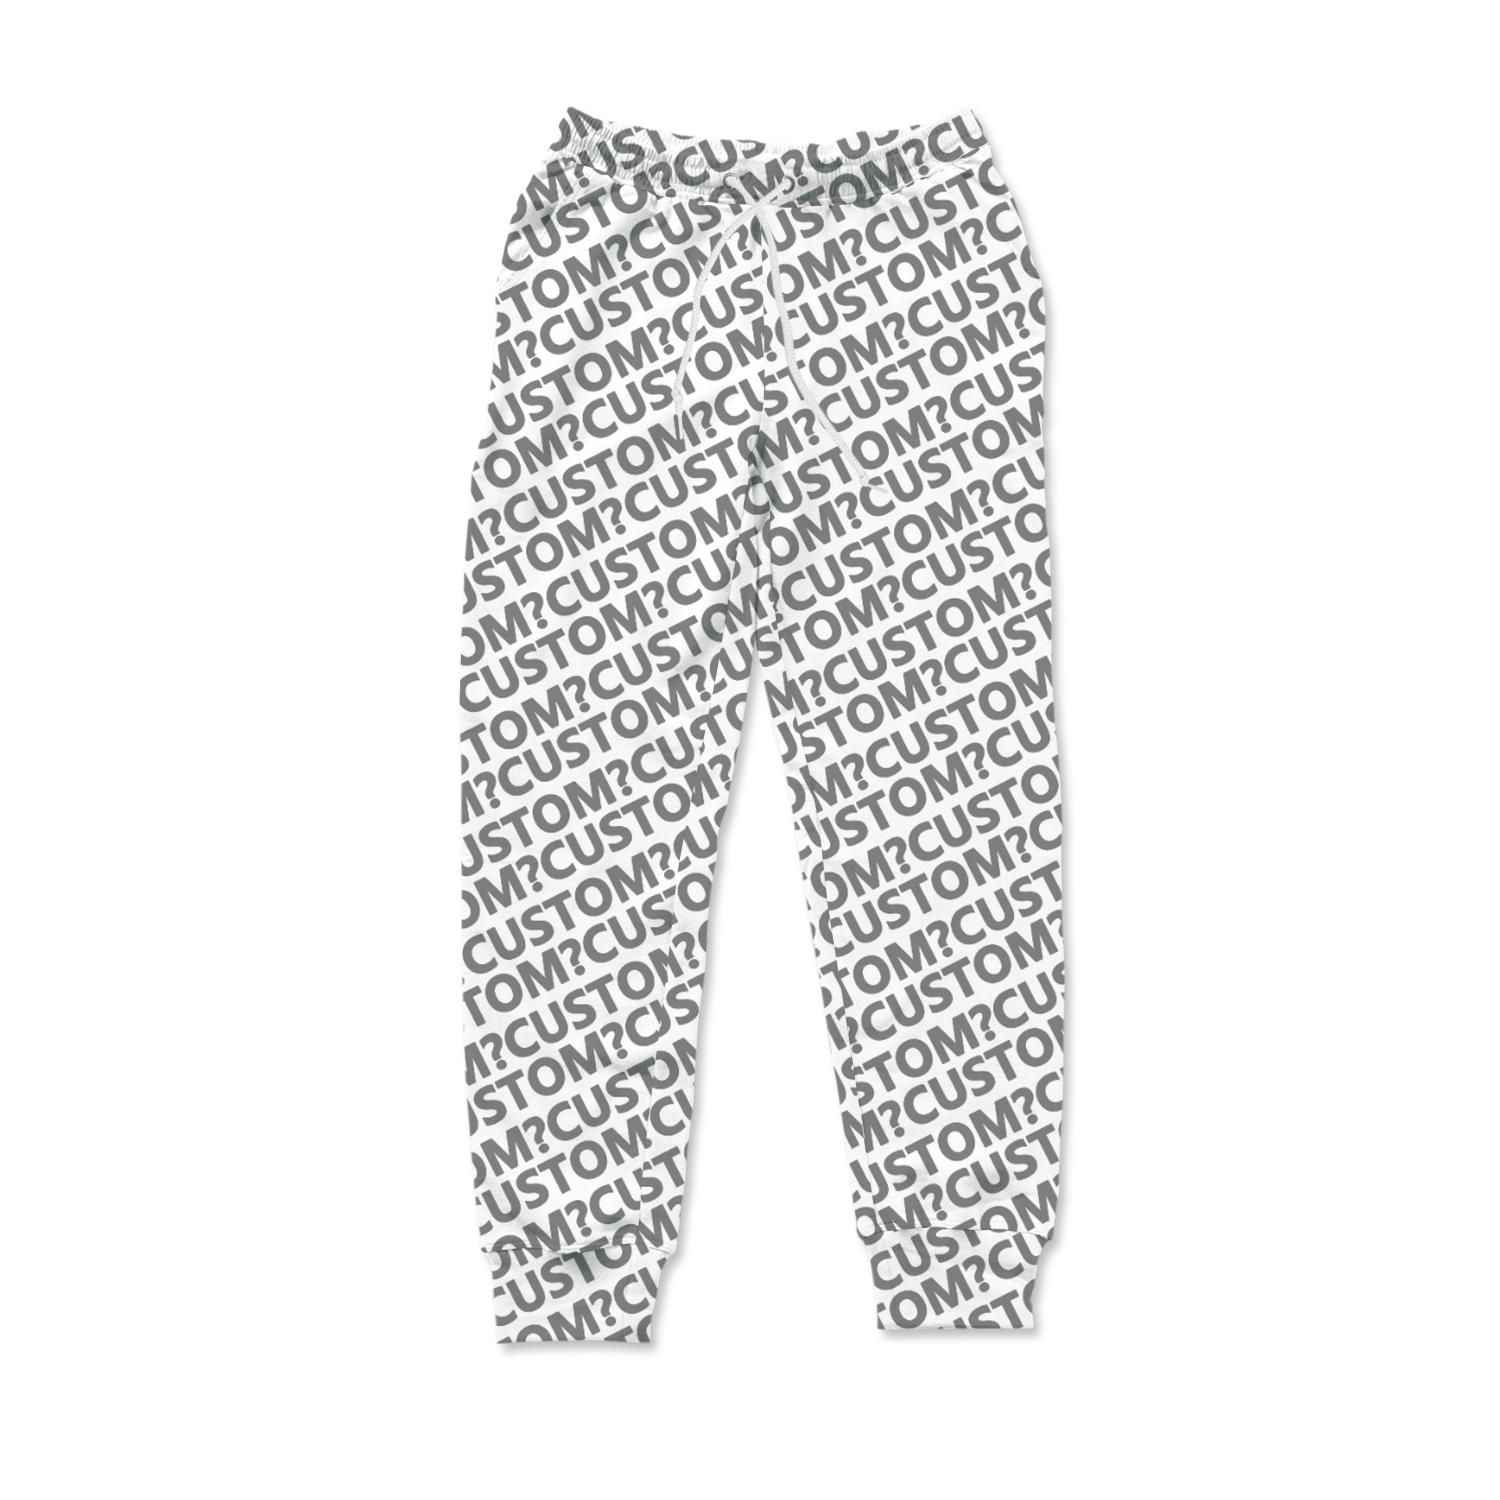 Handmade LV sweatpants!! This is a customized order